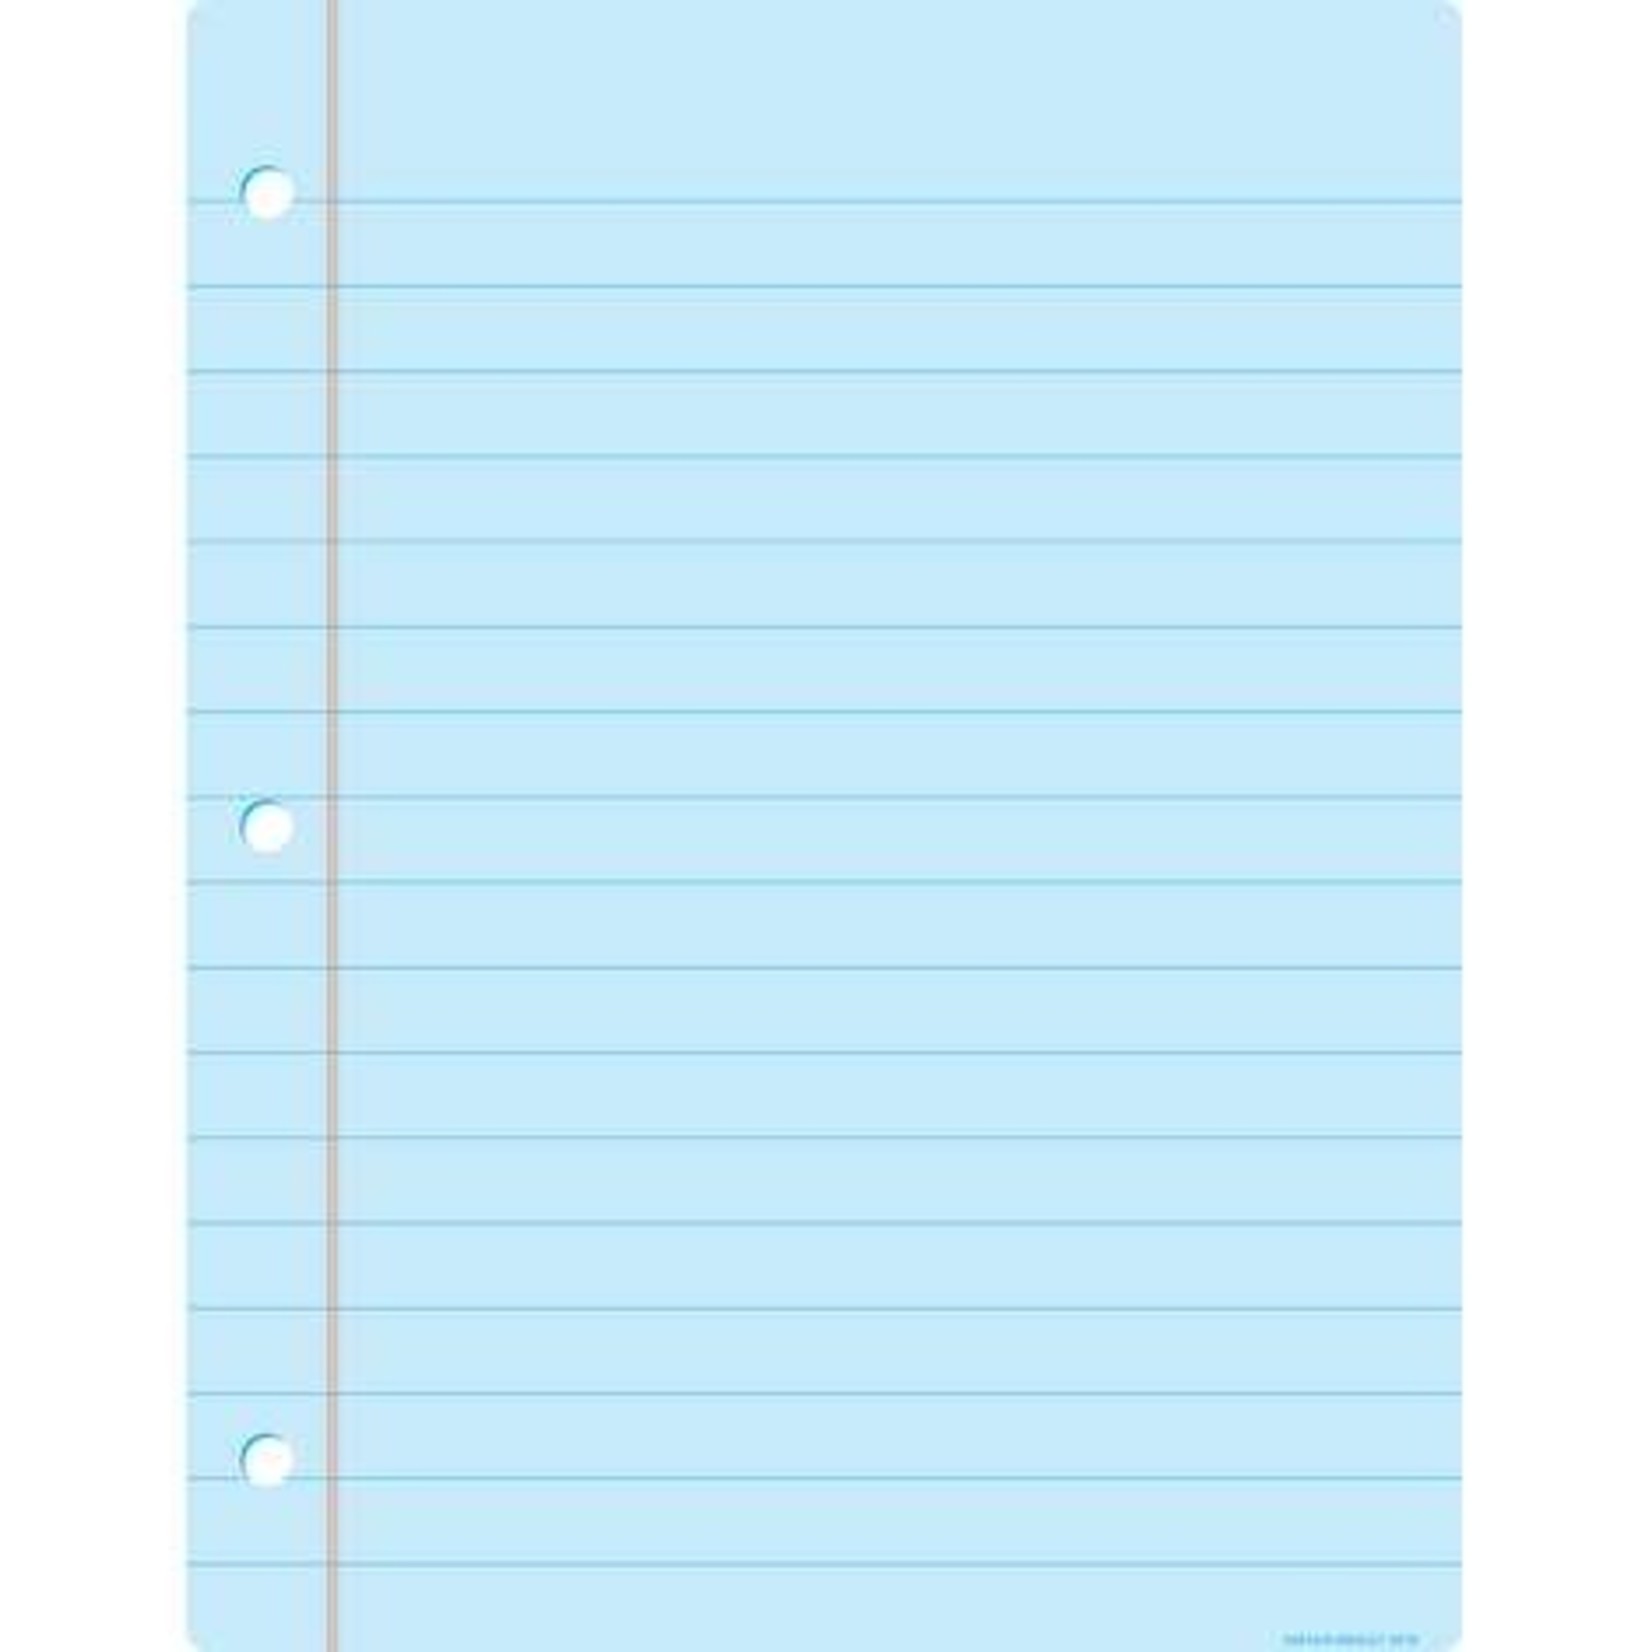 ASHLEY INCORPORATED Smart Poly® Chart 17"x22", Big Light Blue Notebook Paper